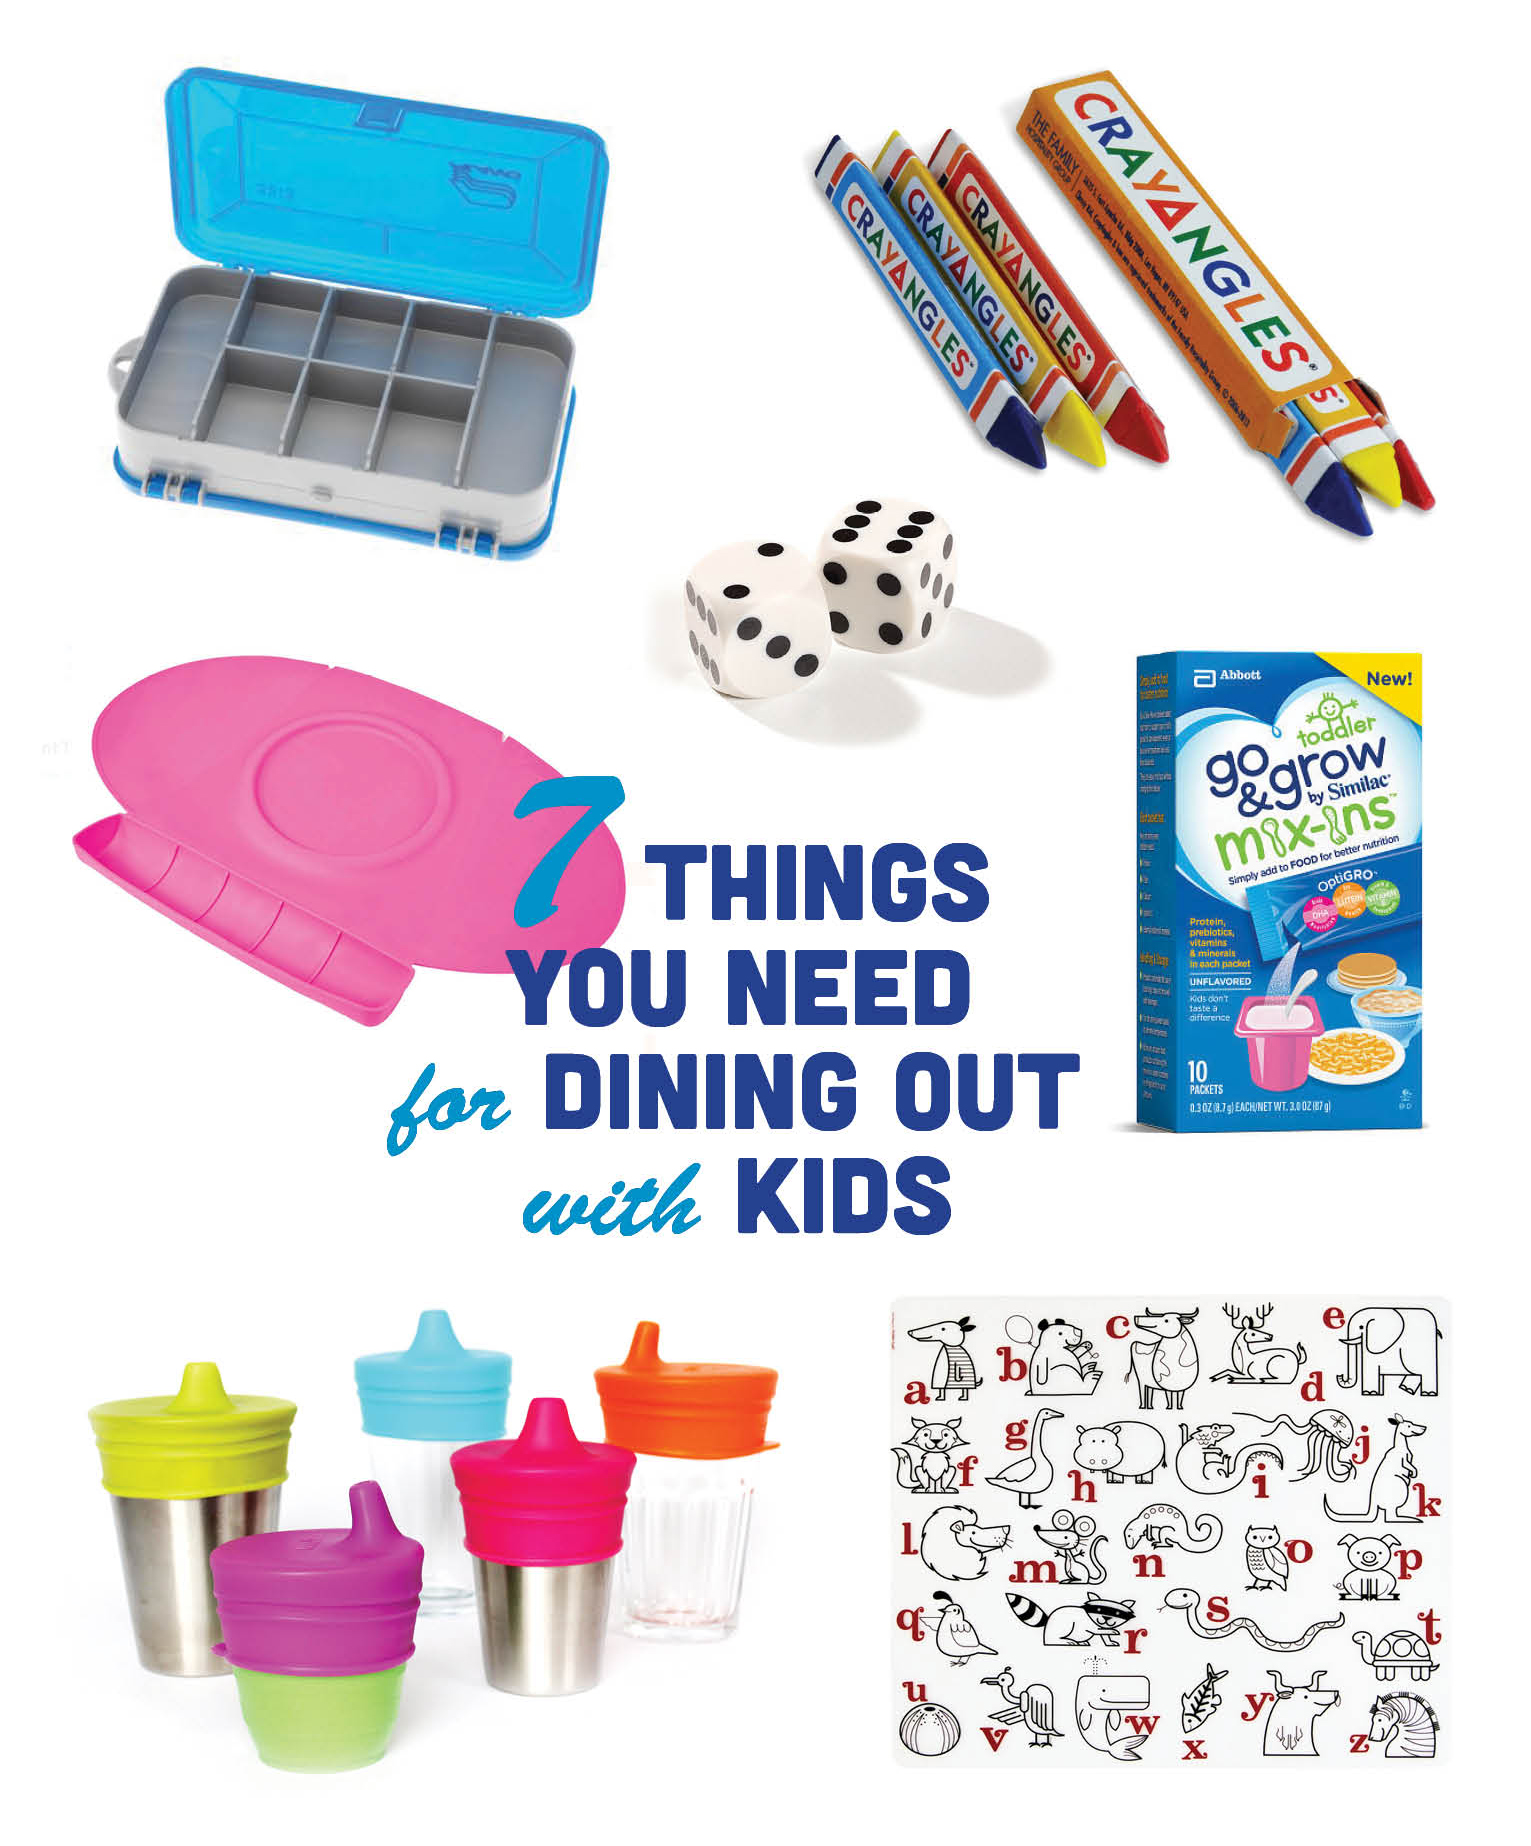 7 products for dining out with kids